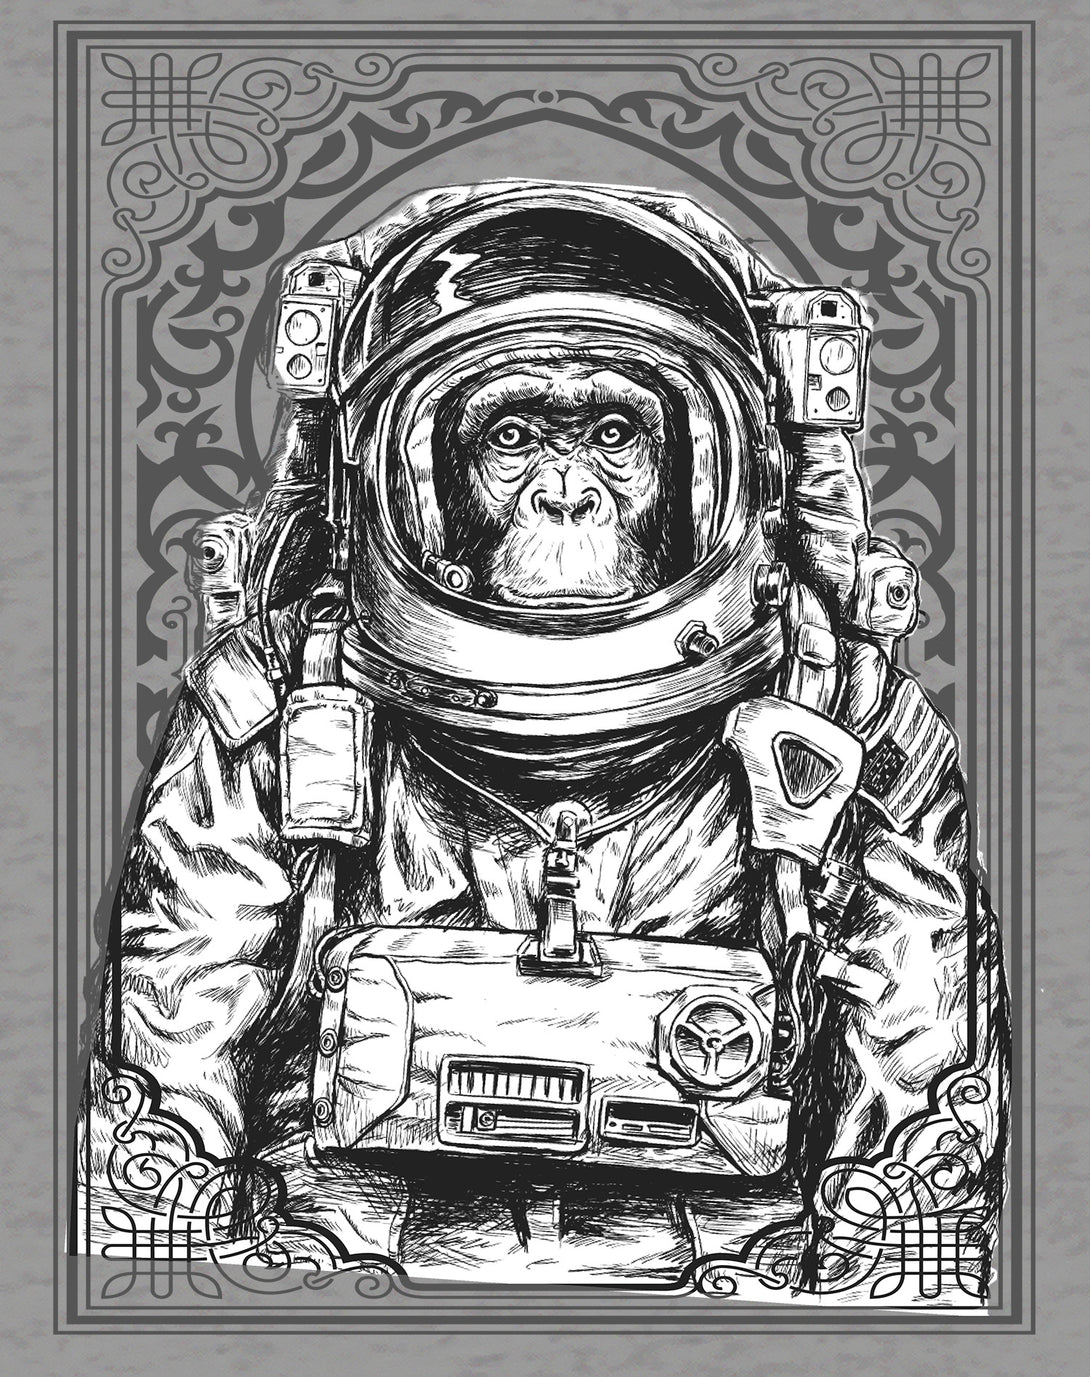 Science Space Monkey Astronaut Launch Nerdy Geek Chic Ironic Official Women's T-shirt Sports Grey - Urban Species Design Close Up